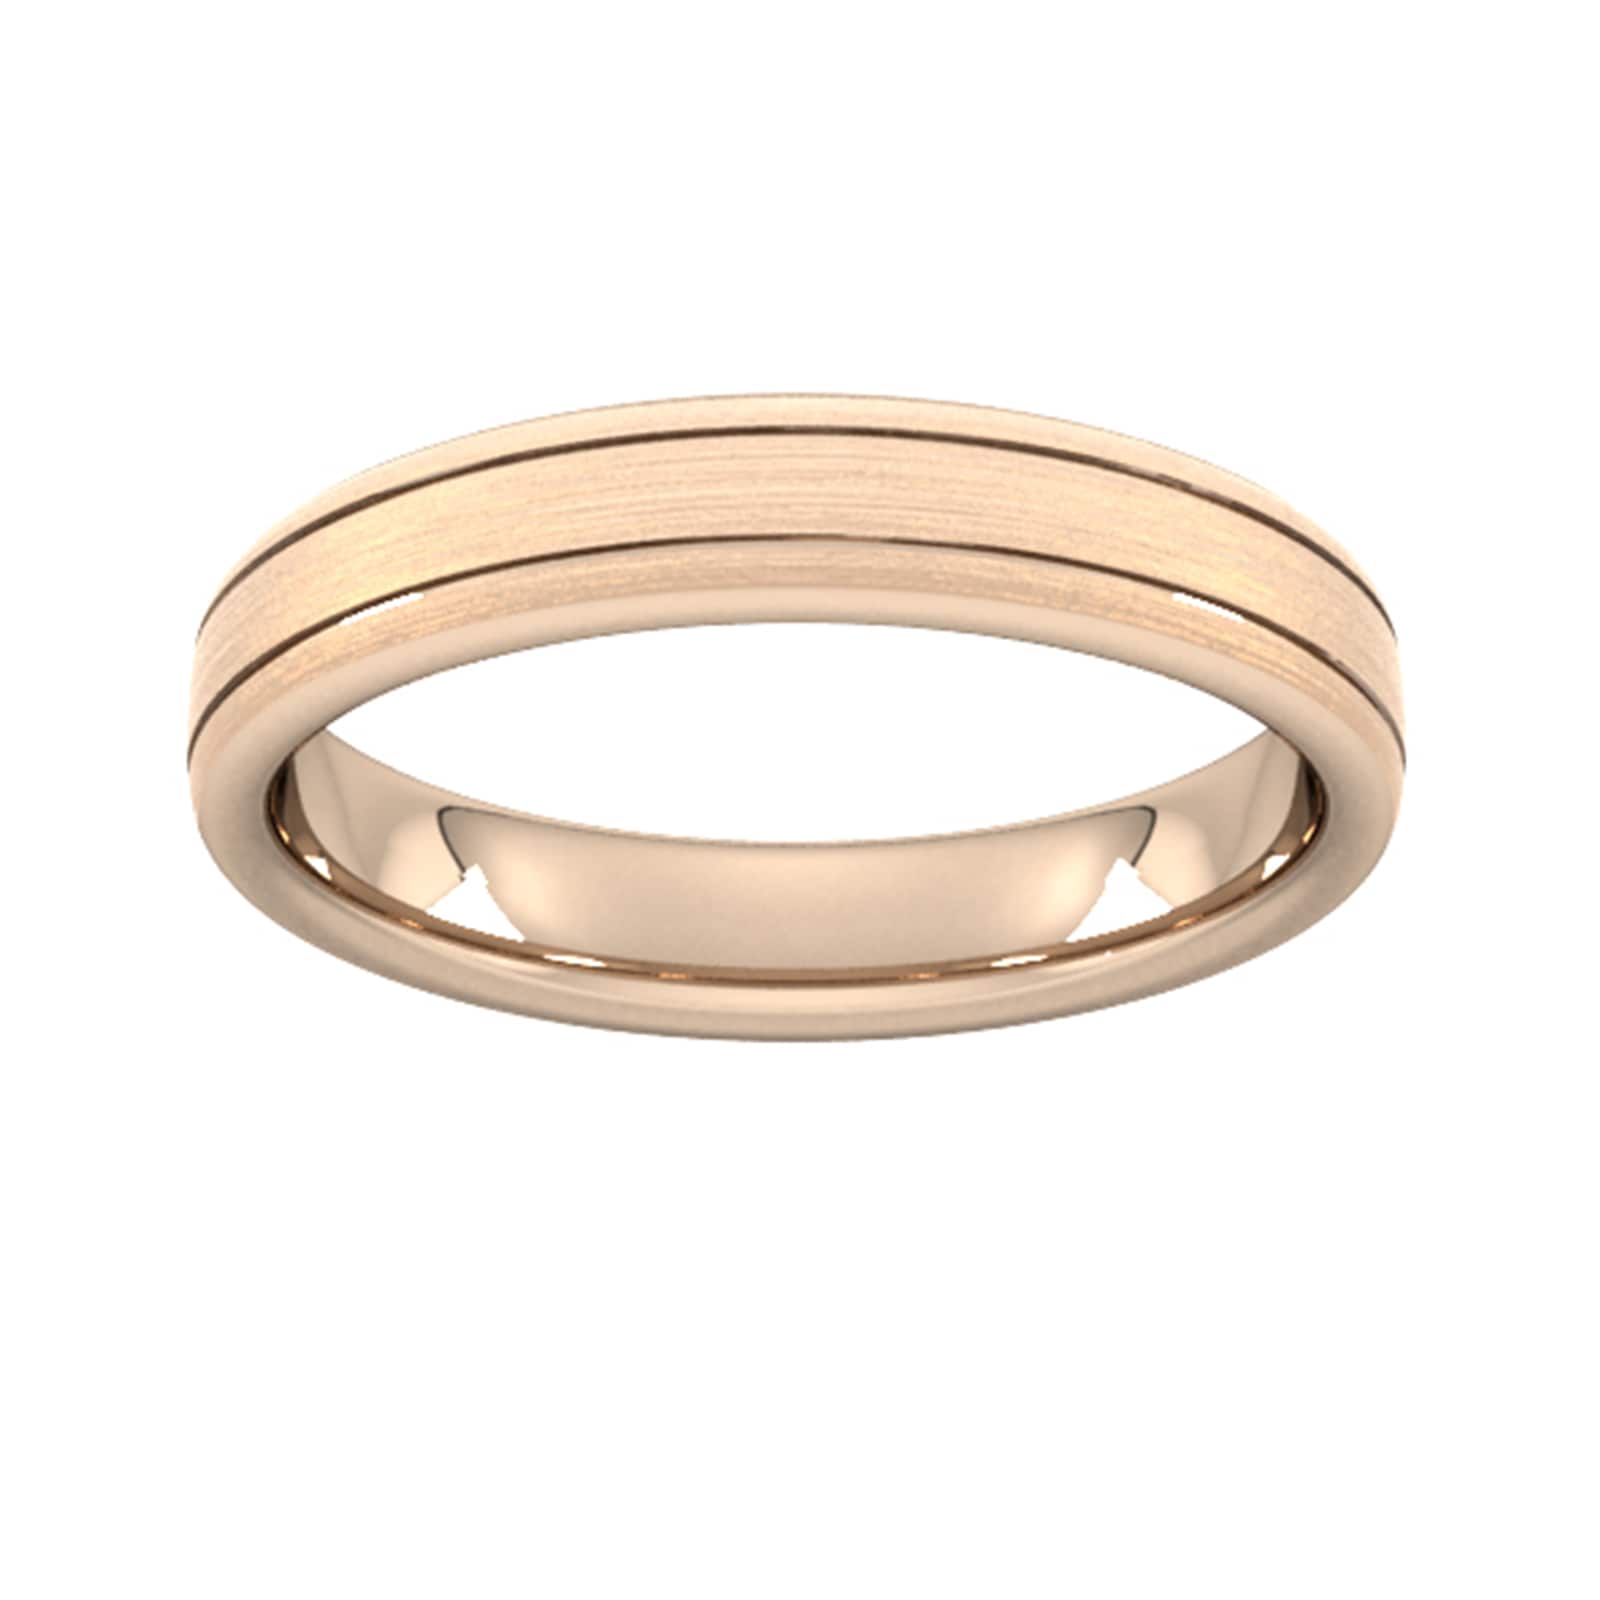 4mm Traditional Court Standard Matt Finish With Double Grooves Wedding Ring In 18 Carat Rose Gold - Ring Size L